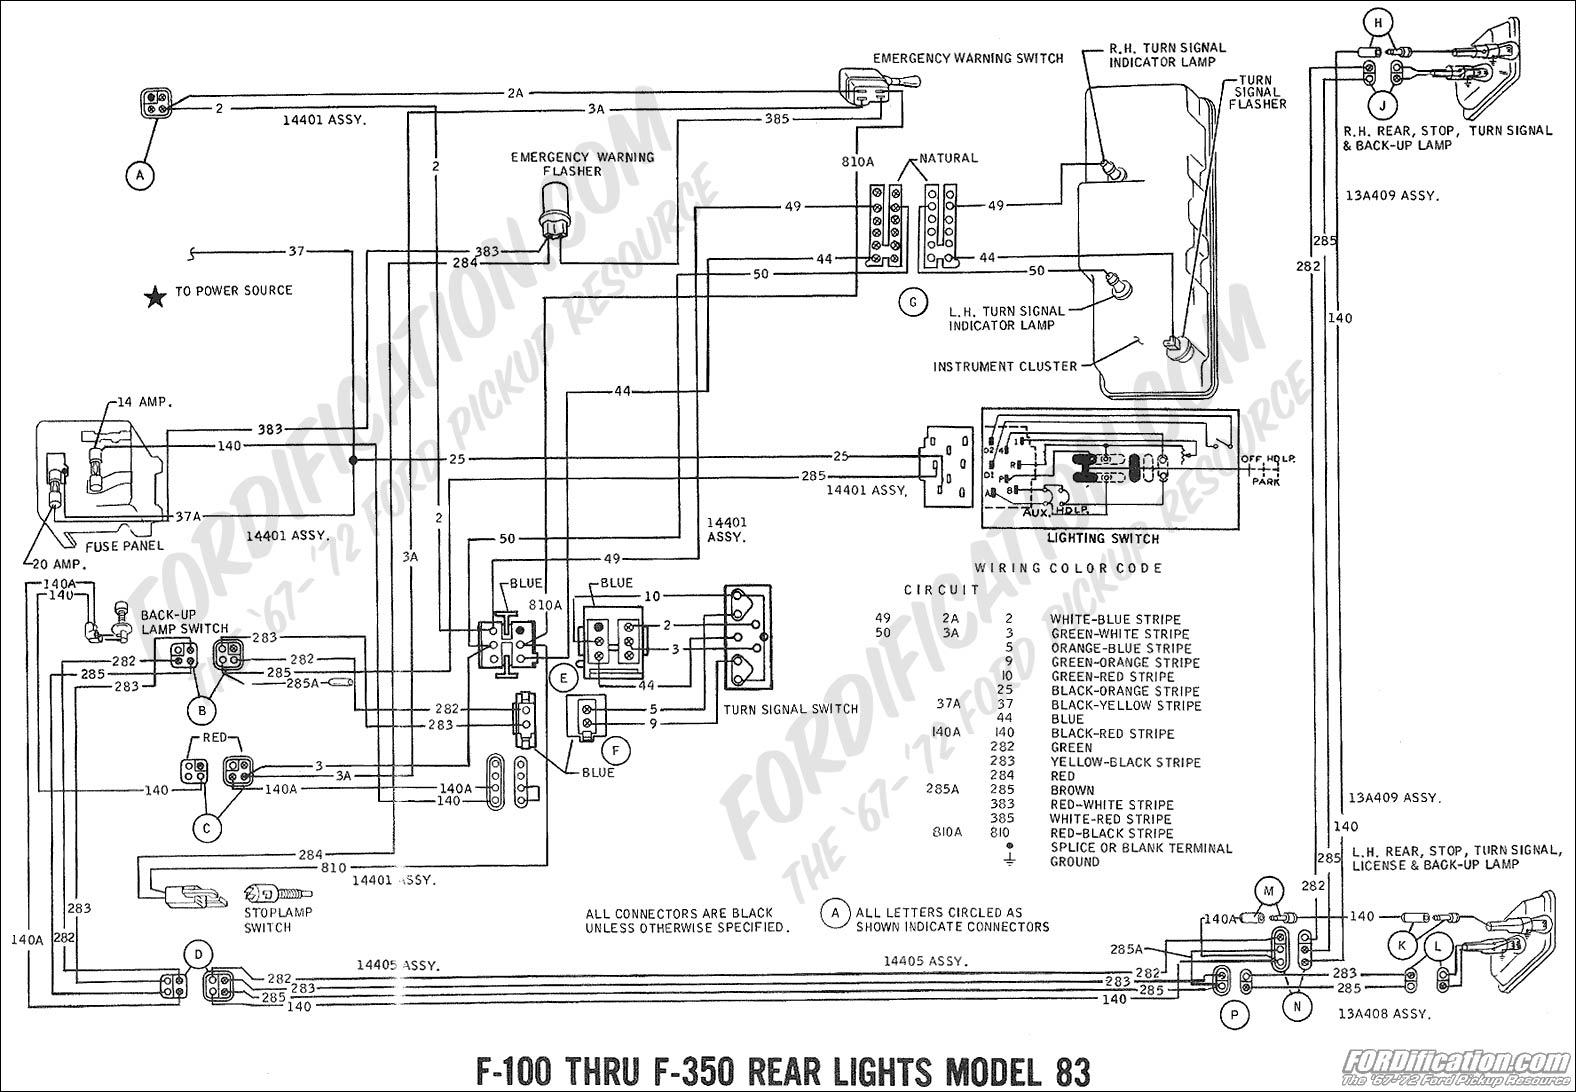 Ford Wiring Harness For Vans - Wiring Diagram Data - Ford Alternator Wiring Diagram